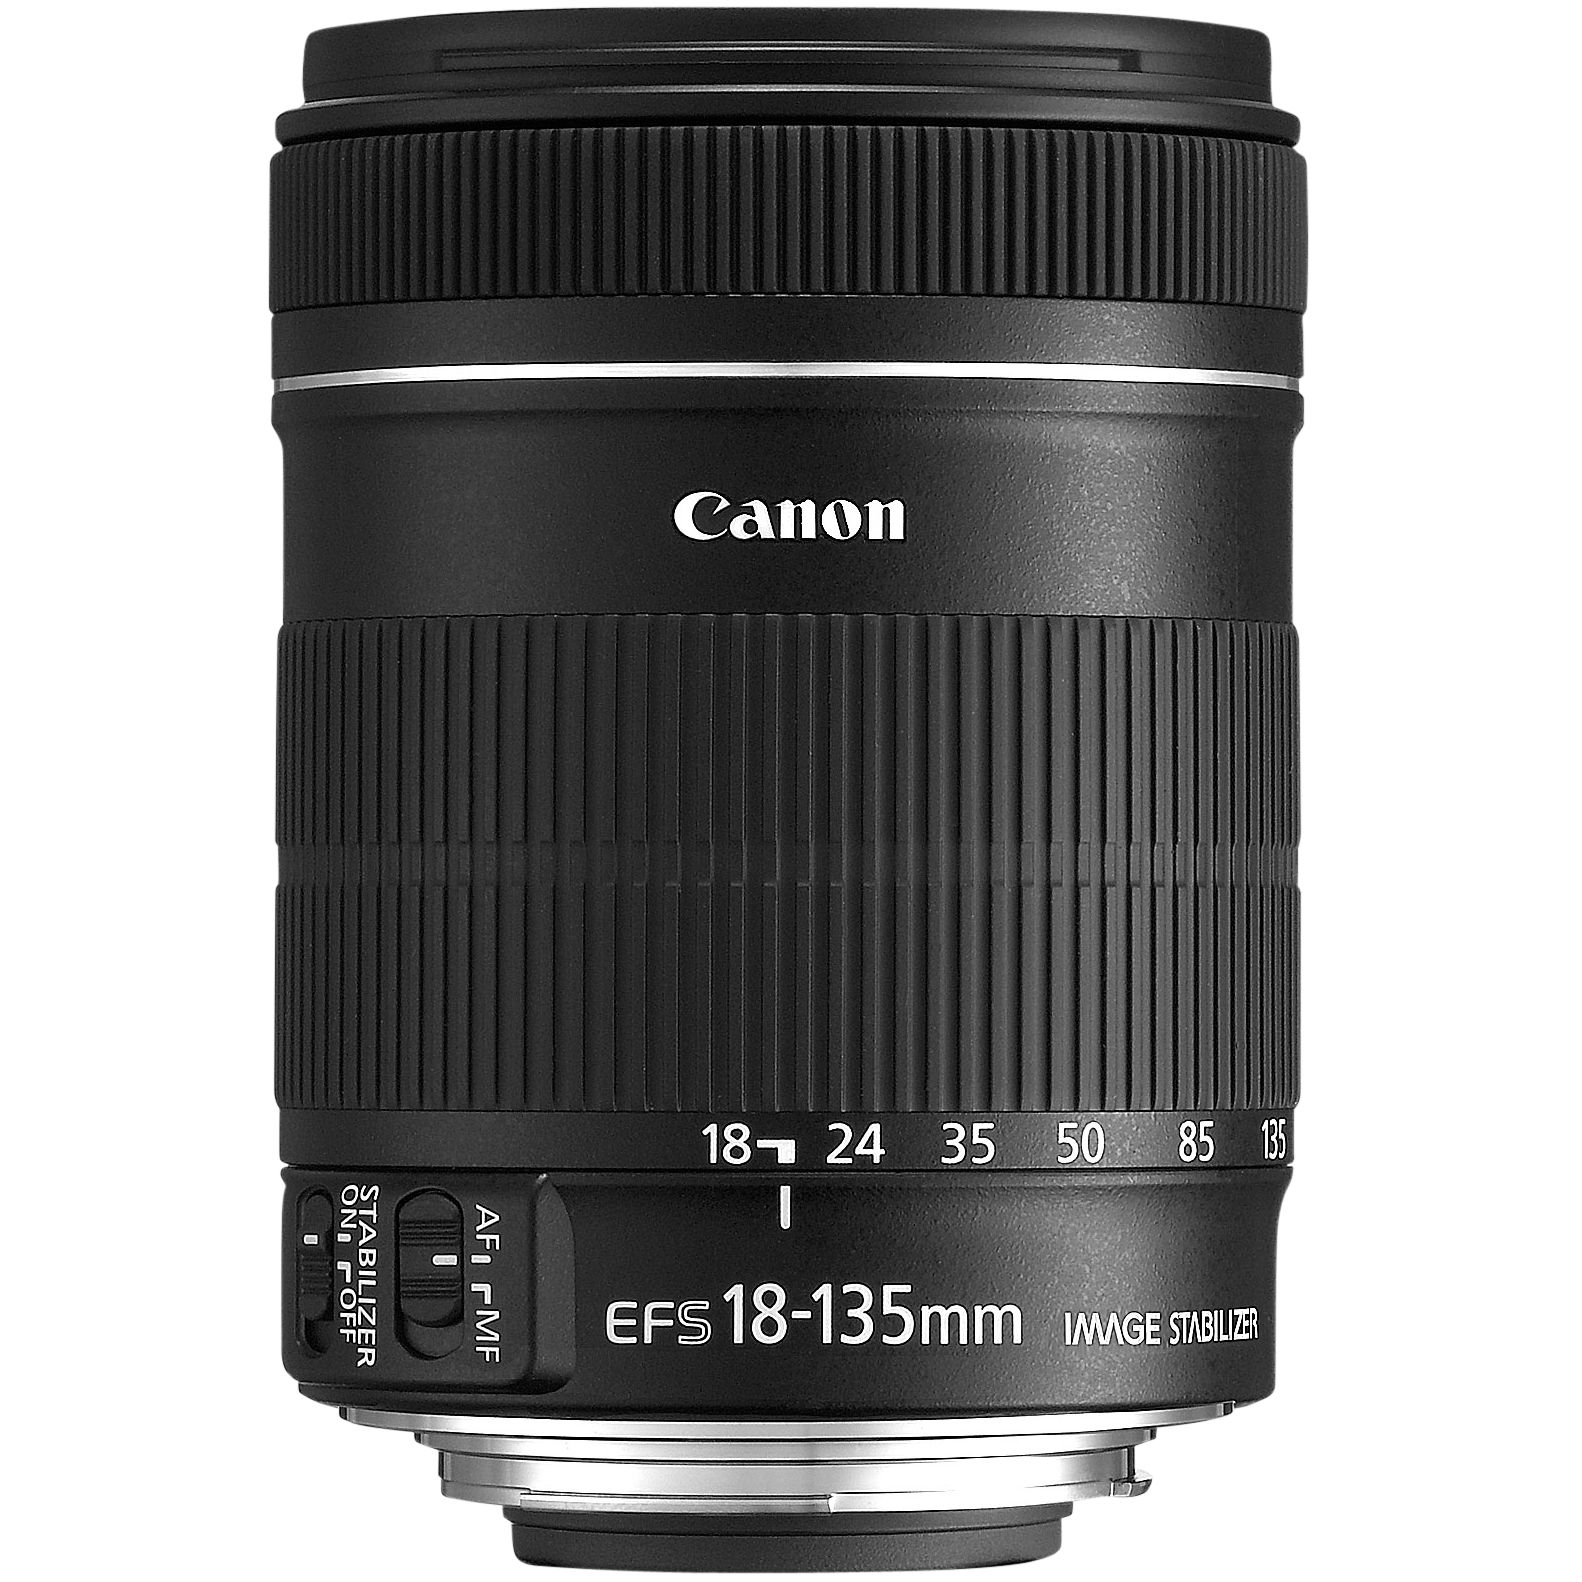 Canon EF-S 18-135mm IS Lens at John Lewis